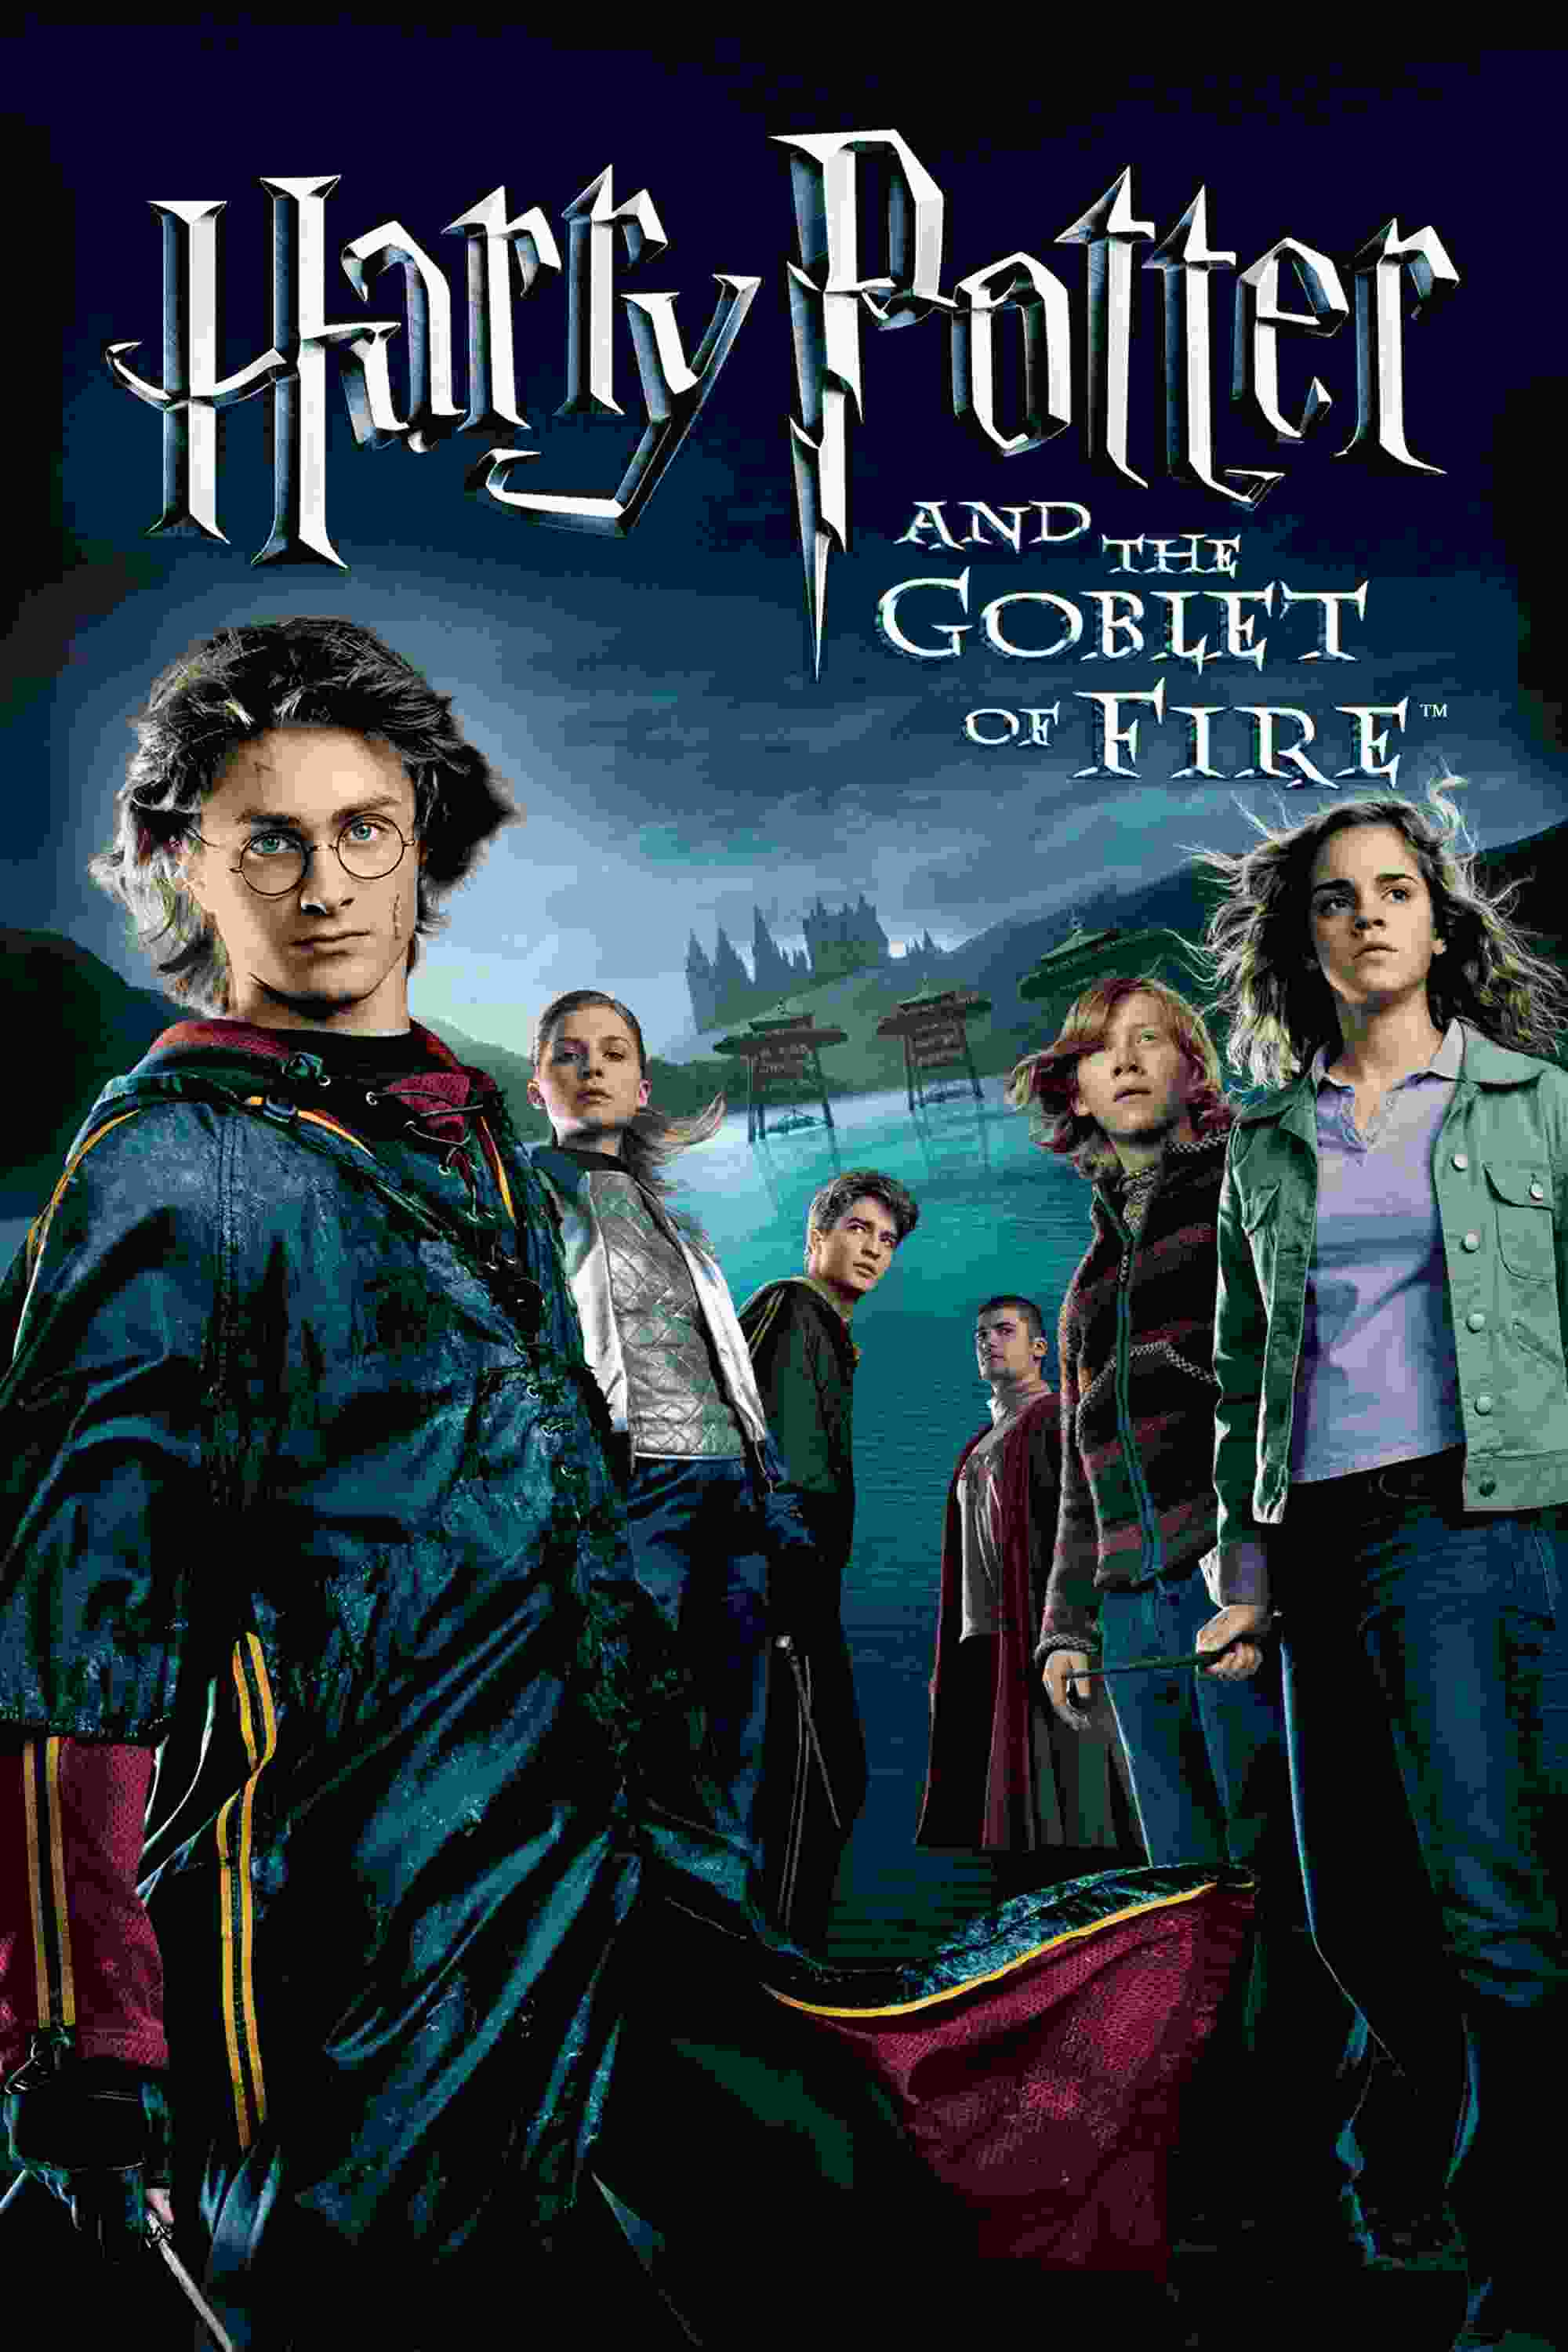 Harry Potter and the Goblet of Fire (2005) Daniel Radcliffe